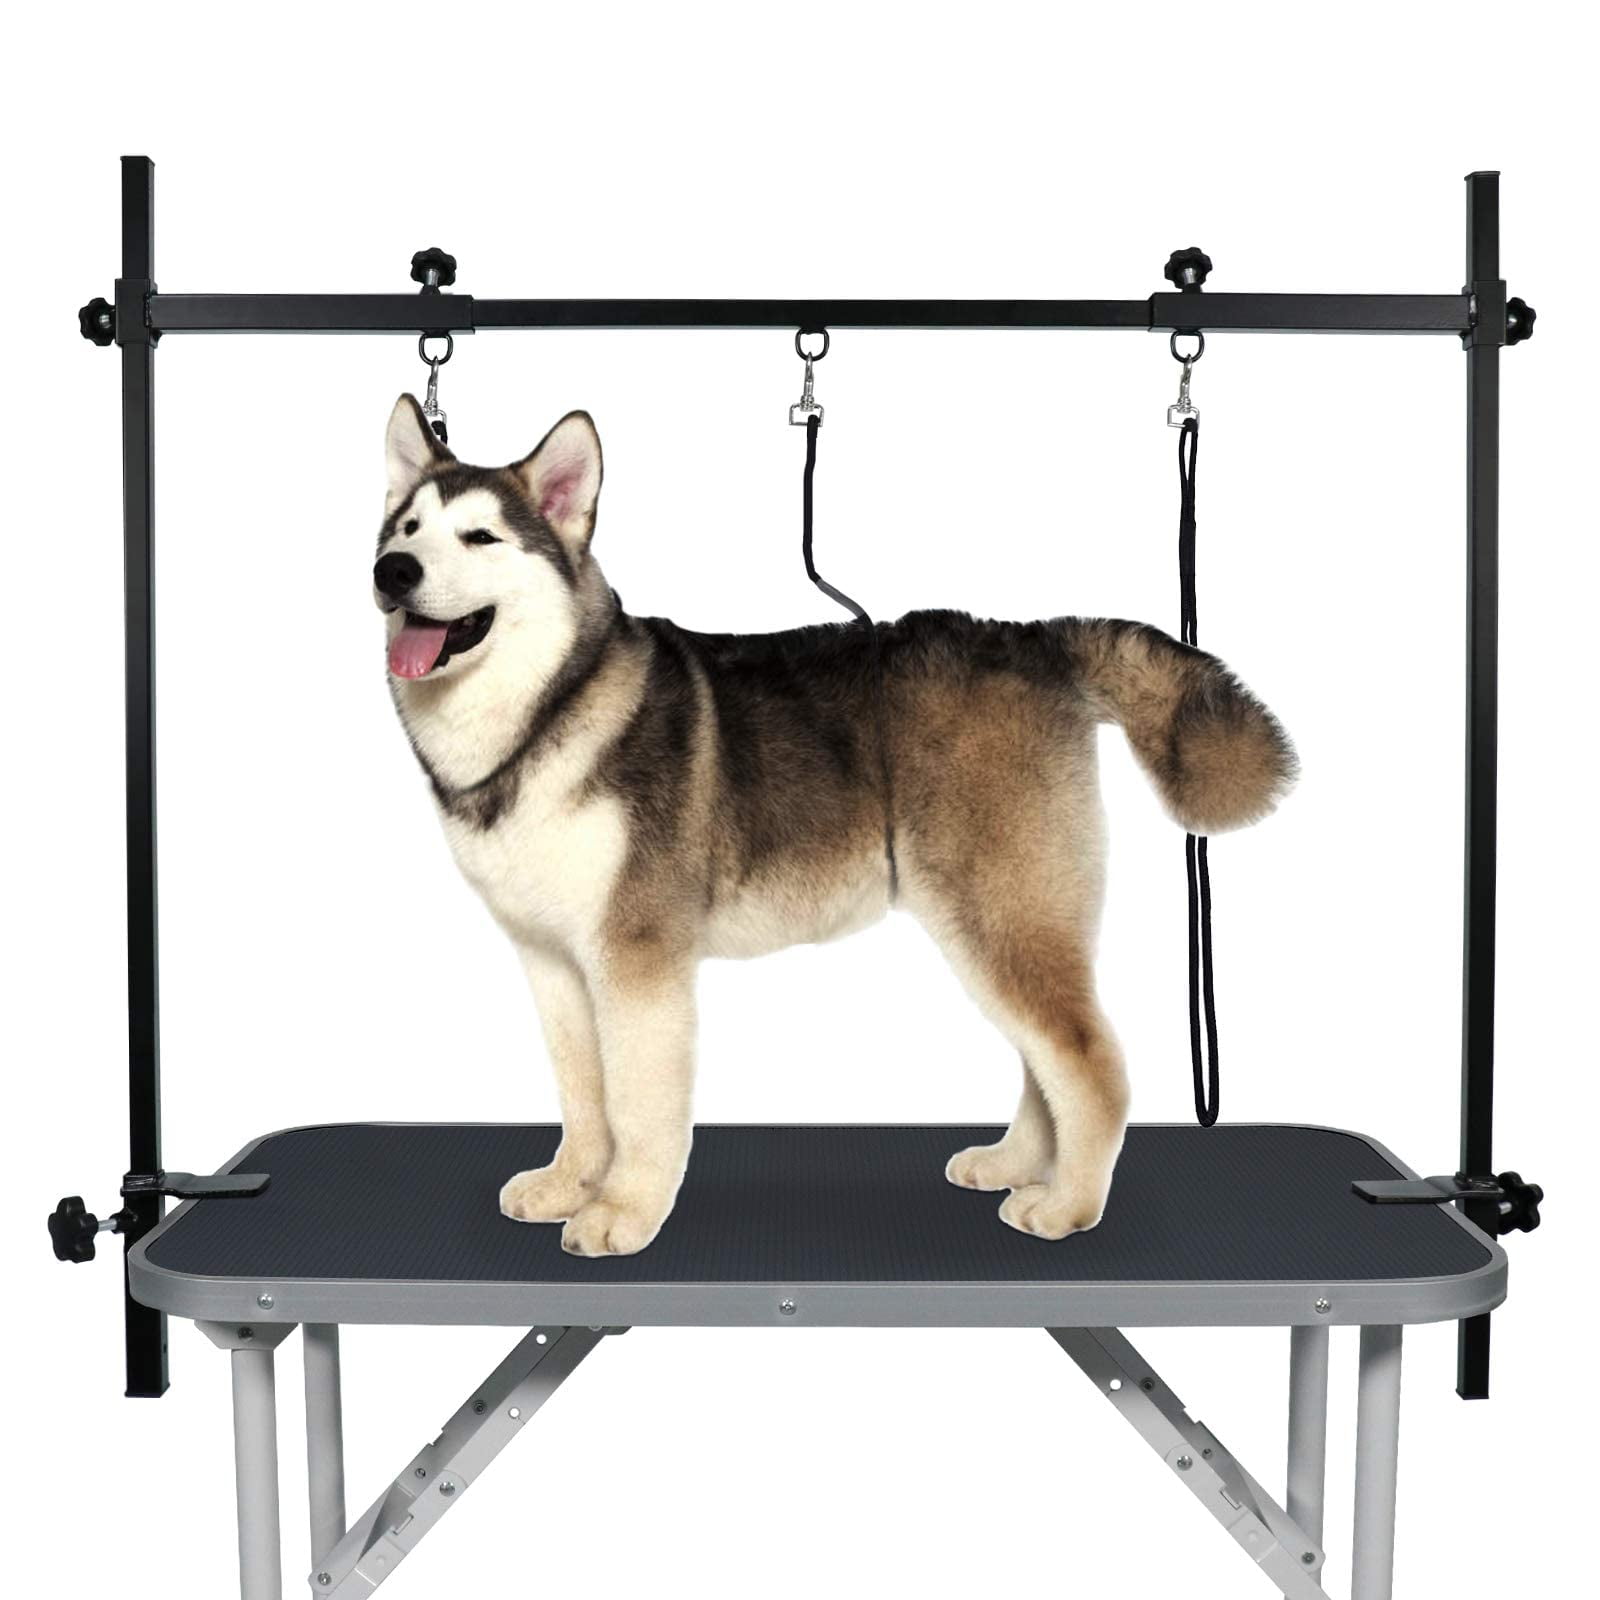 VEVOR Pet Grooming Table Two Arms with Clamp, 36''x24'' Dog Grooming  Station, Foldable Pets Grooming Stand for Medium and Small Dogs, Free No  Sit Haunch Holder with Grooming Loop, Bearing 330lbs